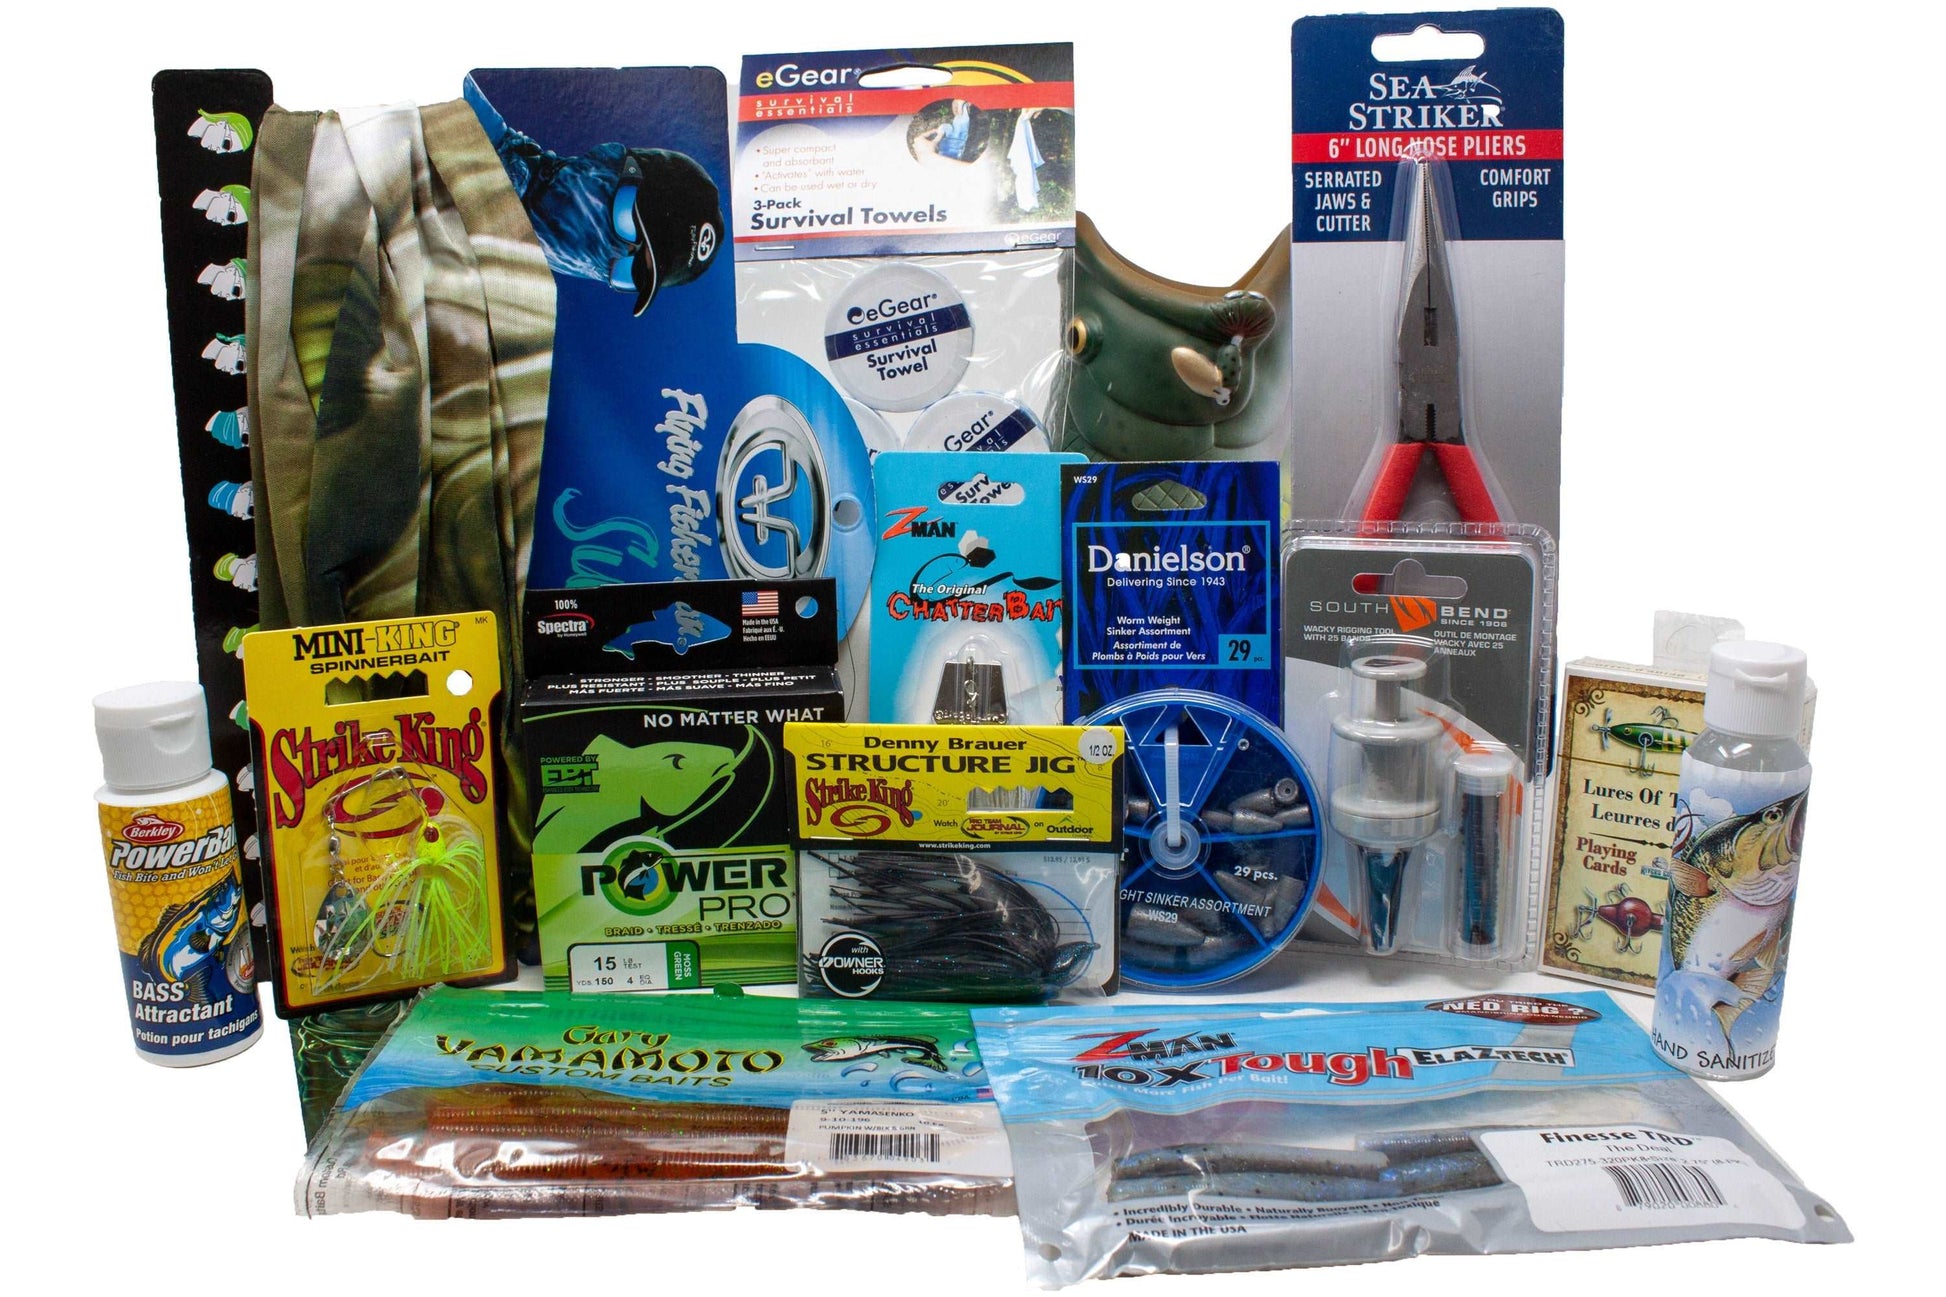 Ultimate Bass Fishing Bouquet  Unique Gift for the Avid Fisherman – Powers  Handmade Gifts